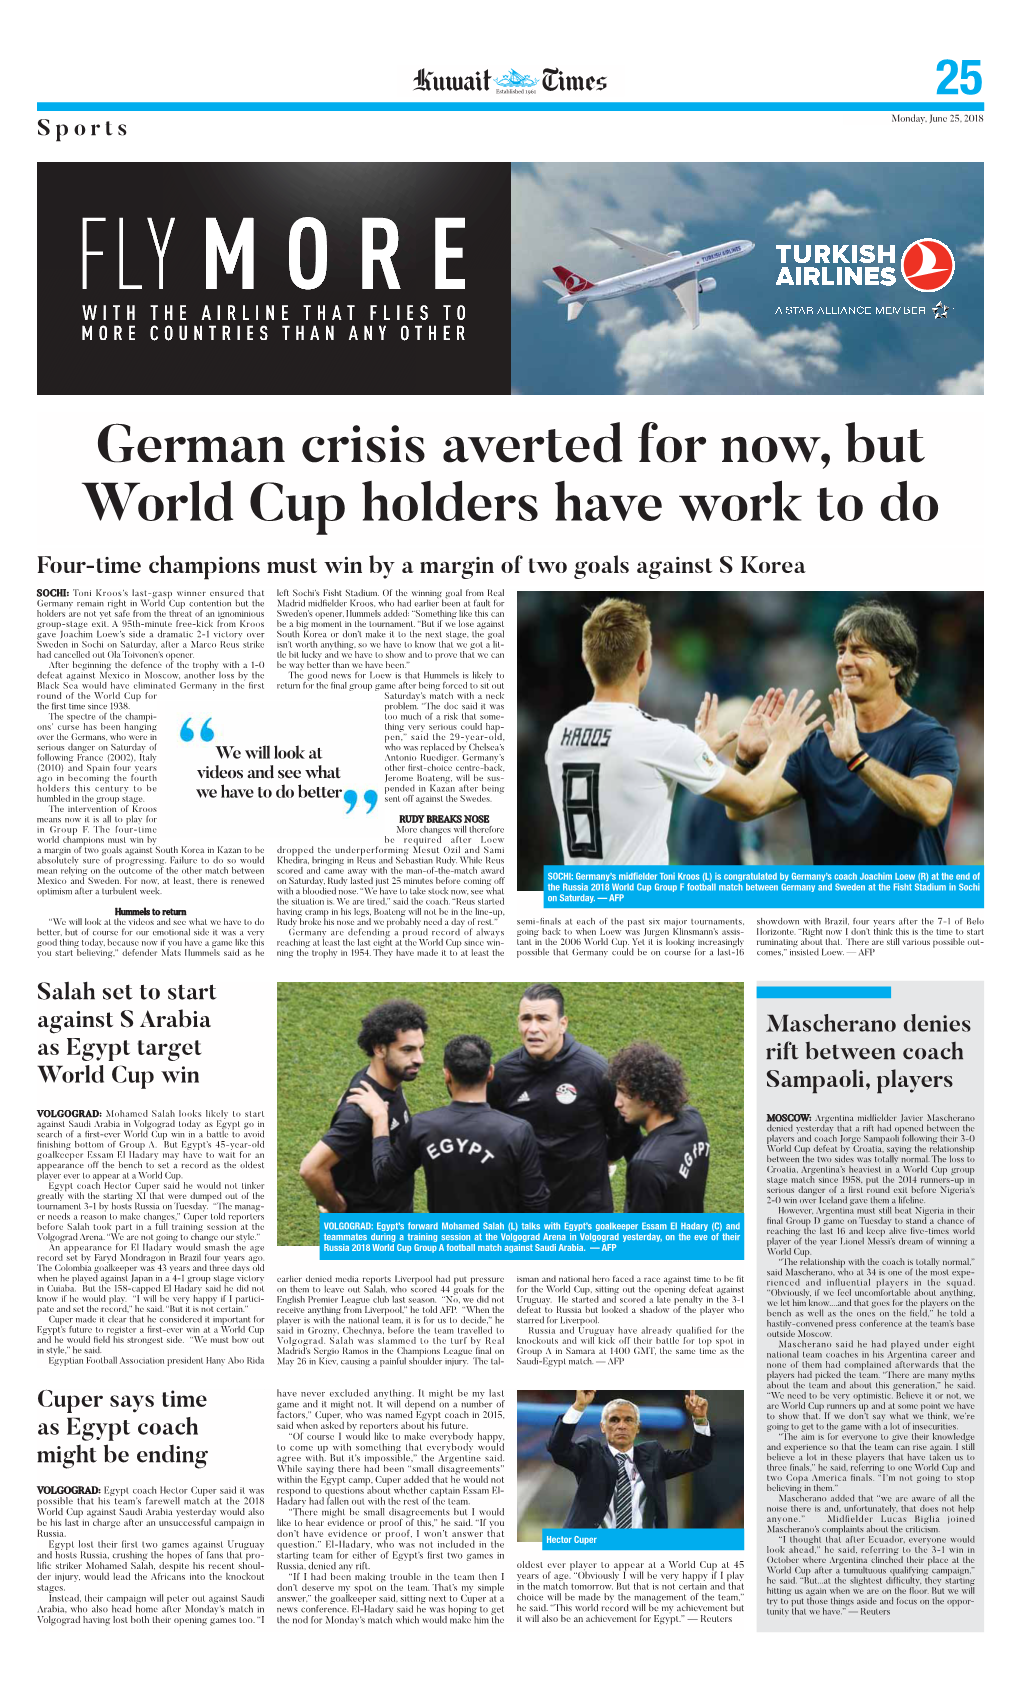 German Crisis Averted for Now, but World Cup Holders Have Work to Do Four-Time Champions Must Win by a Margin of Two Goals Against S Korea